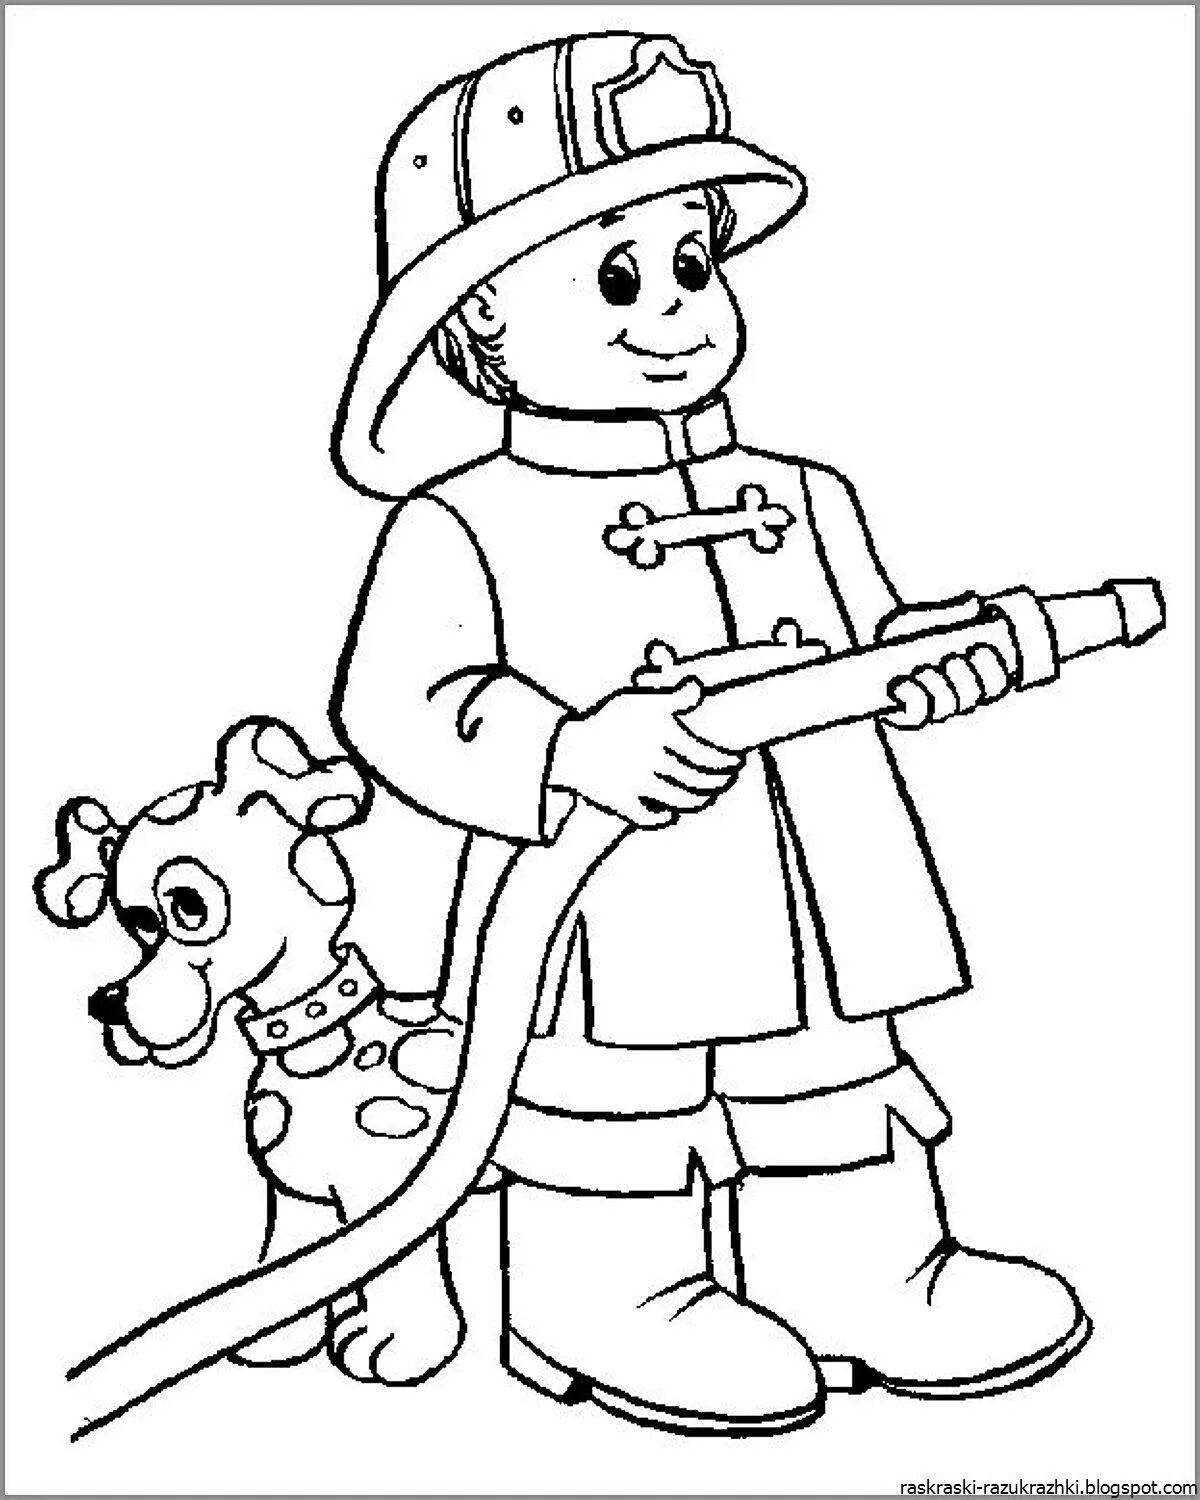 Awesome drawing of a fireman for kids